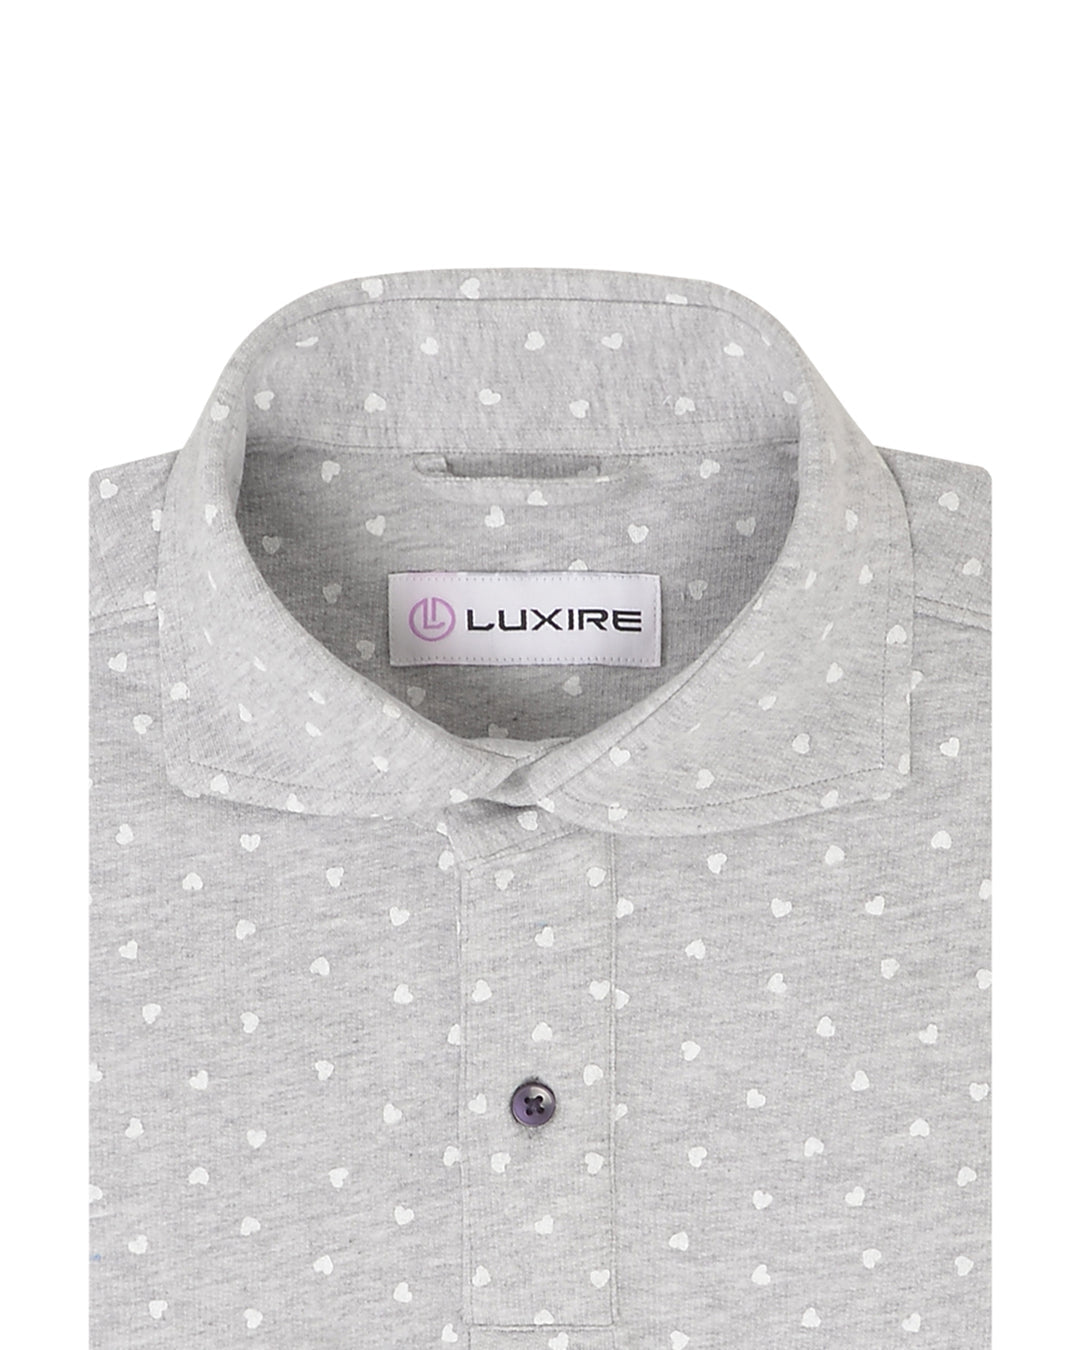 Collar of the custom oxford polo shirt for men by Luxire in grey with white heart print